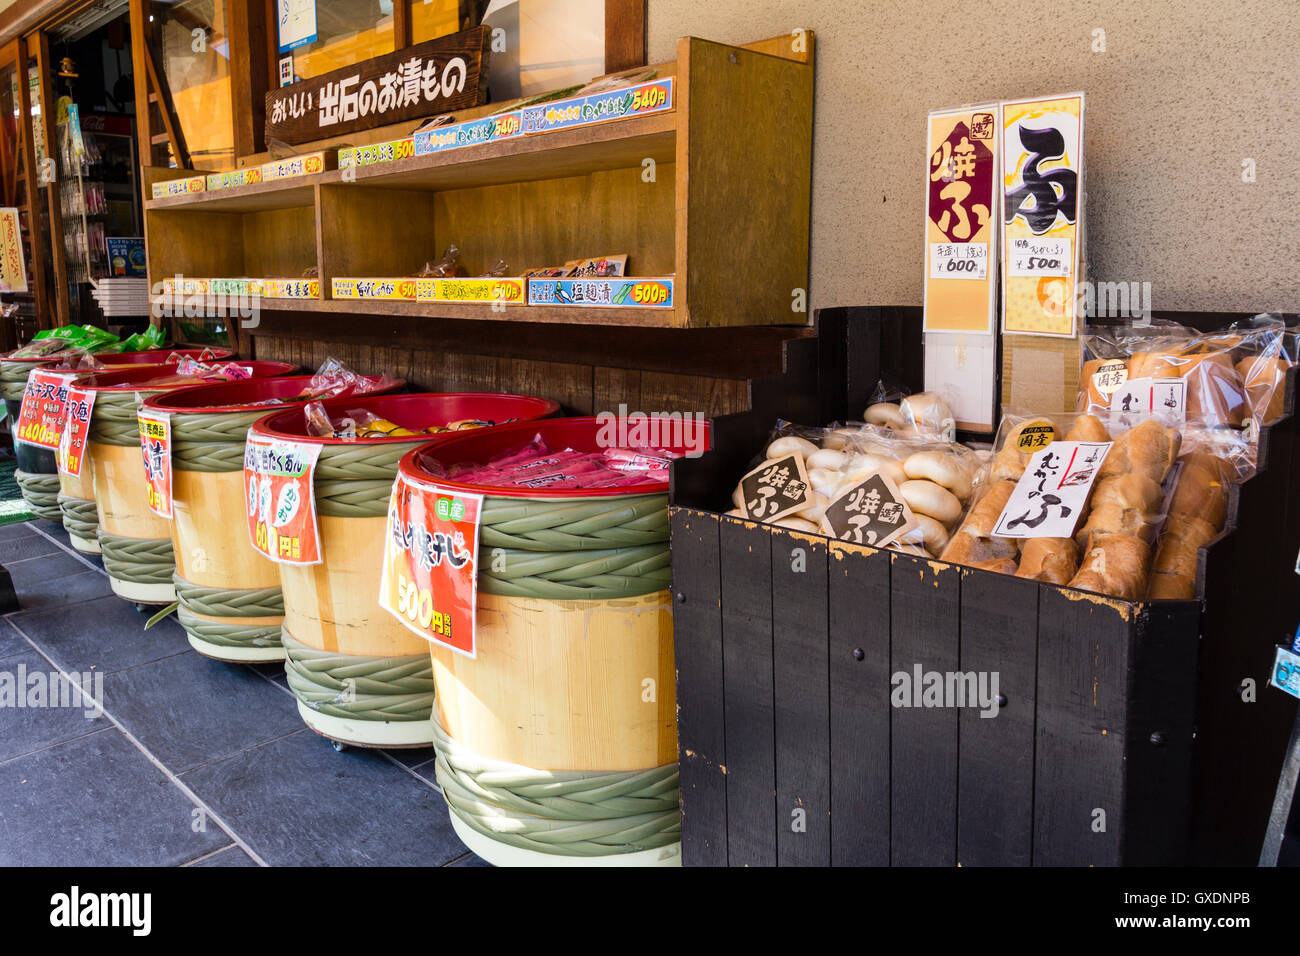 Japan, Izushi. Row of four tubs and packets of tourist souvenir sweets and foods in barrels arranged on pavement outside store. Stock Photo